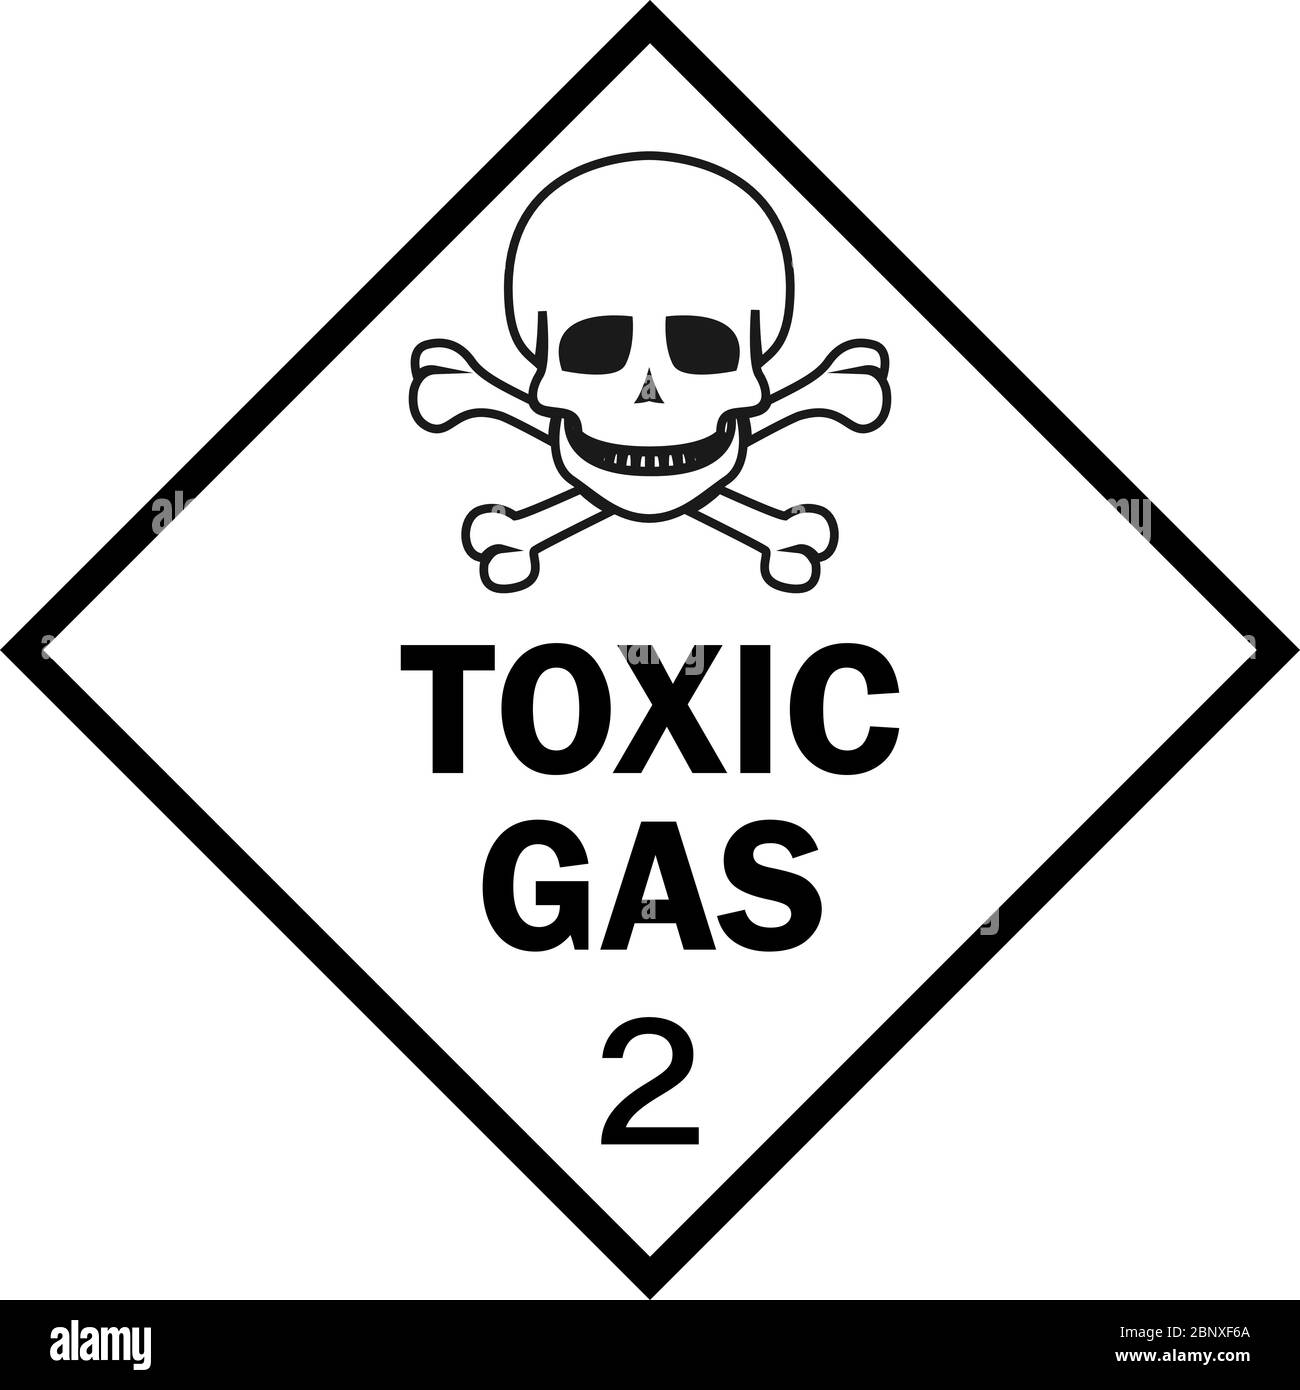 Toxic gas sign. Dangerous goods placards class 2. Black on white. Stock Vector